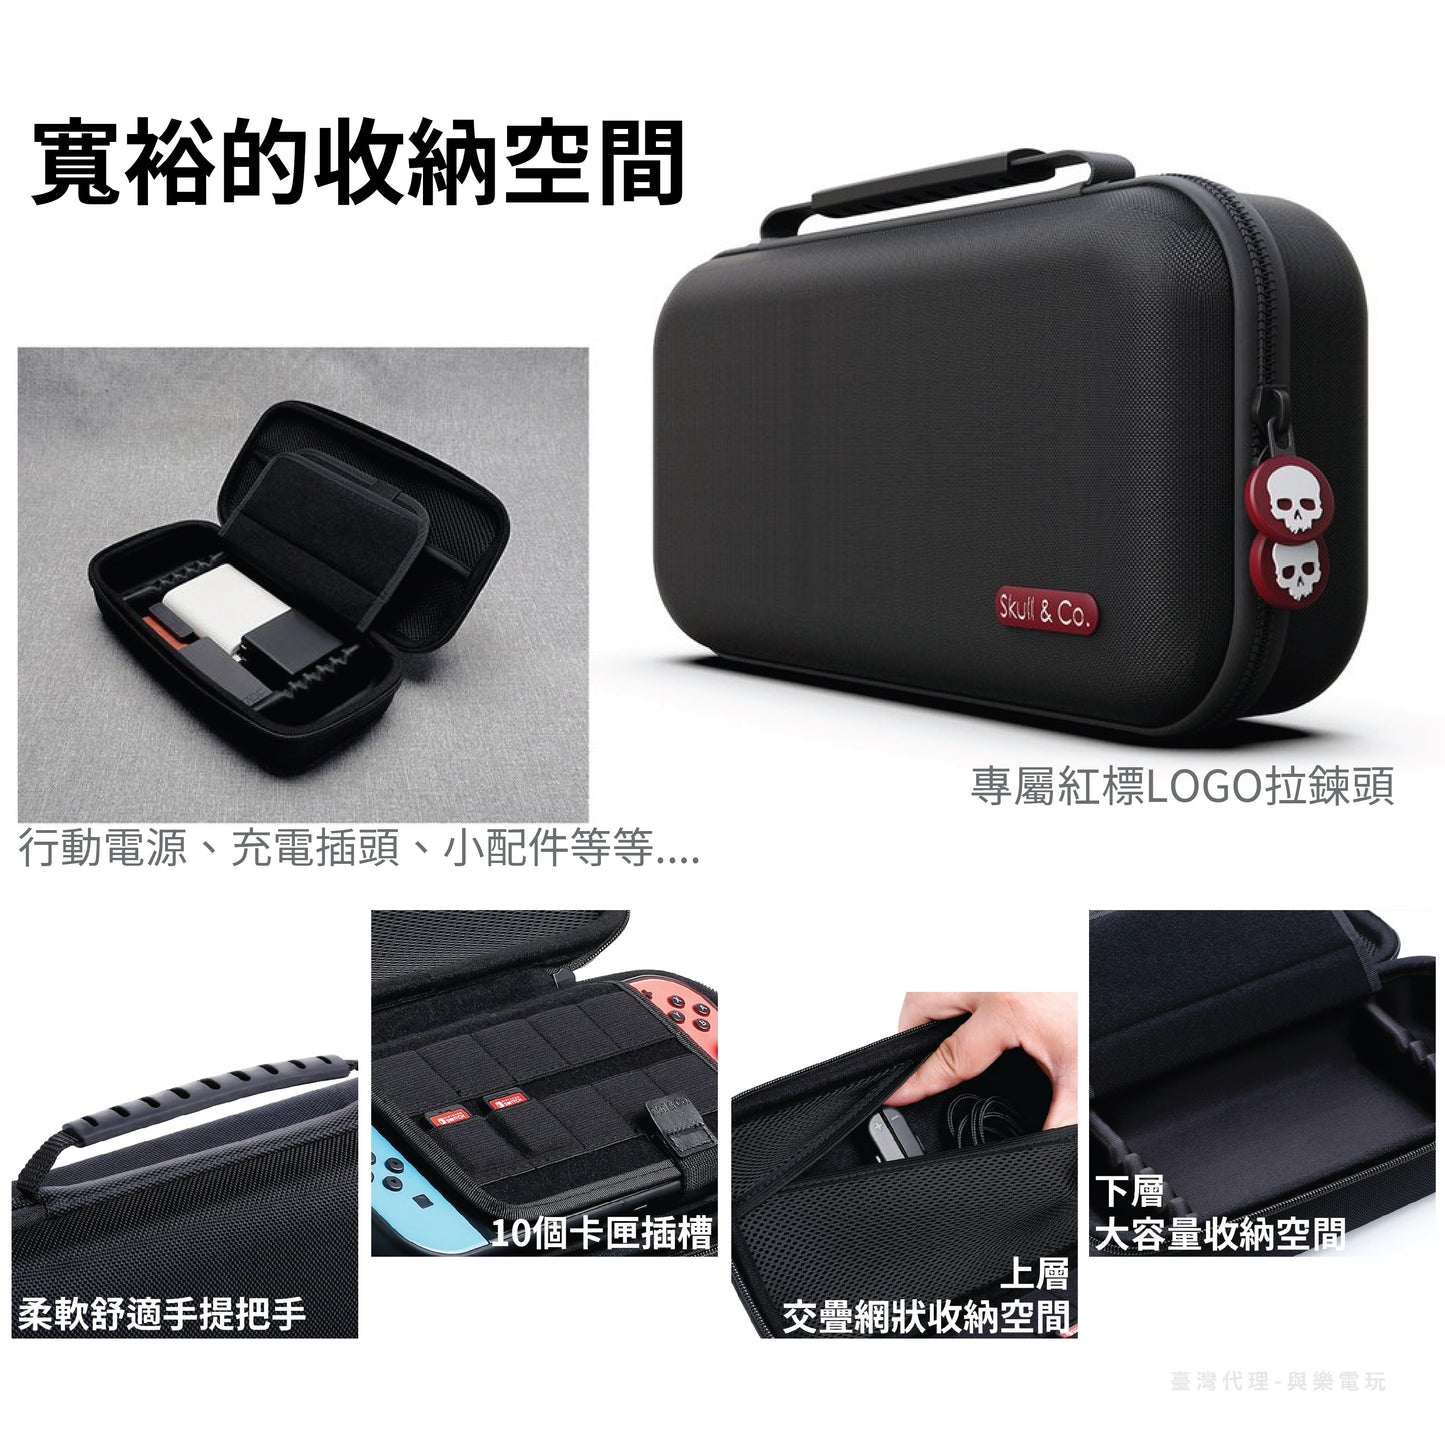 Red label version of water-repellent storage bag suitable for Nintendo Switch/OLED 